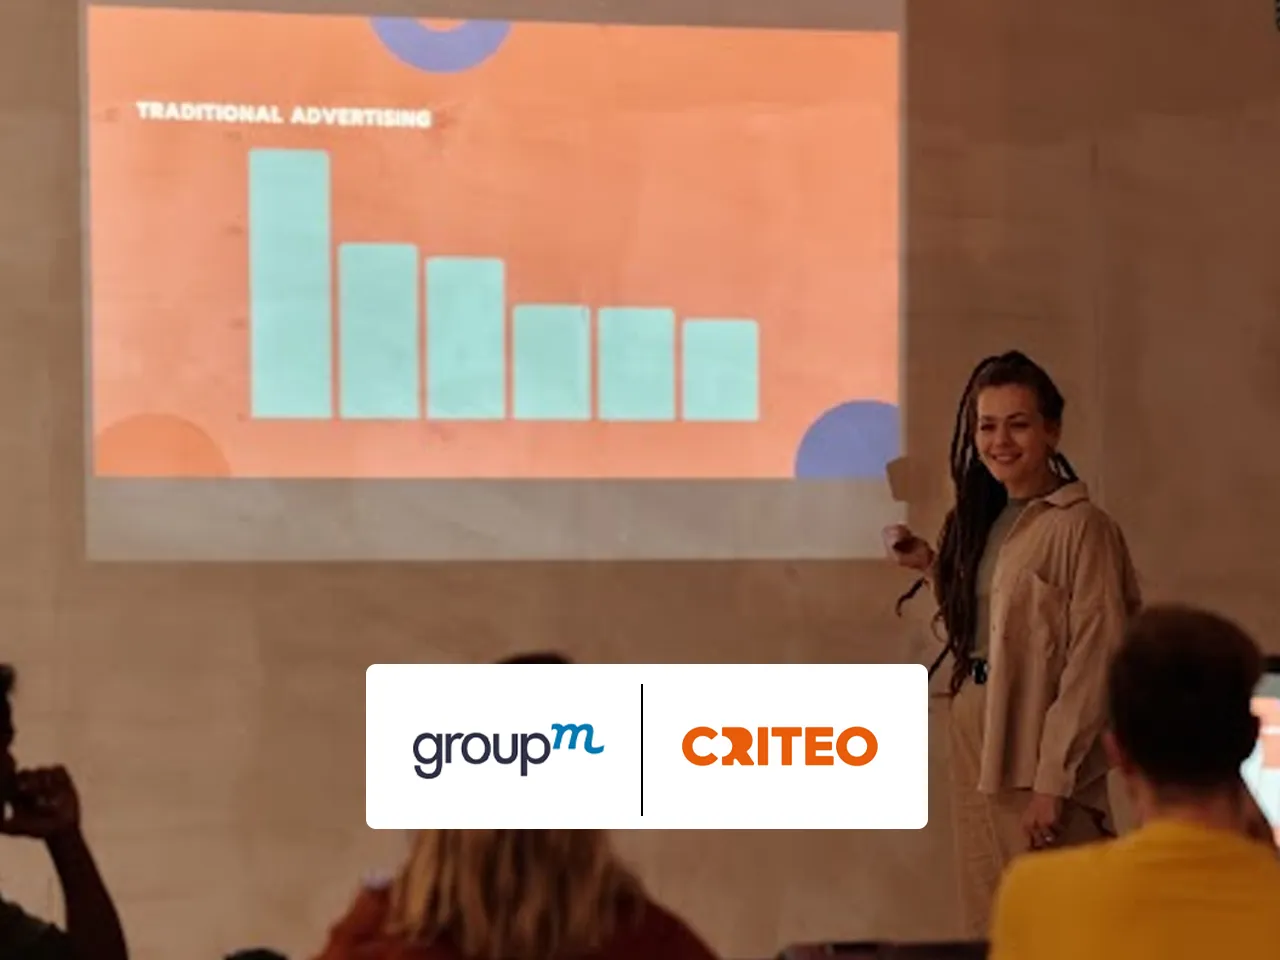 GroupM and Criteo partner to provide integrated solutions to clients in APAC